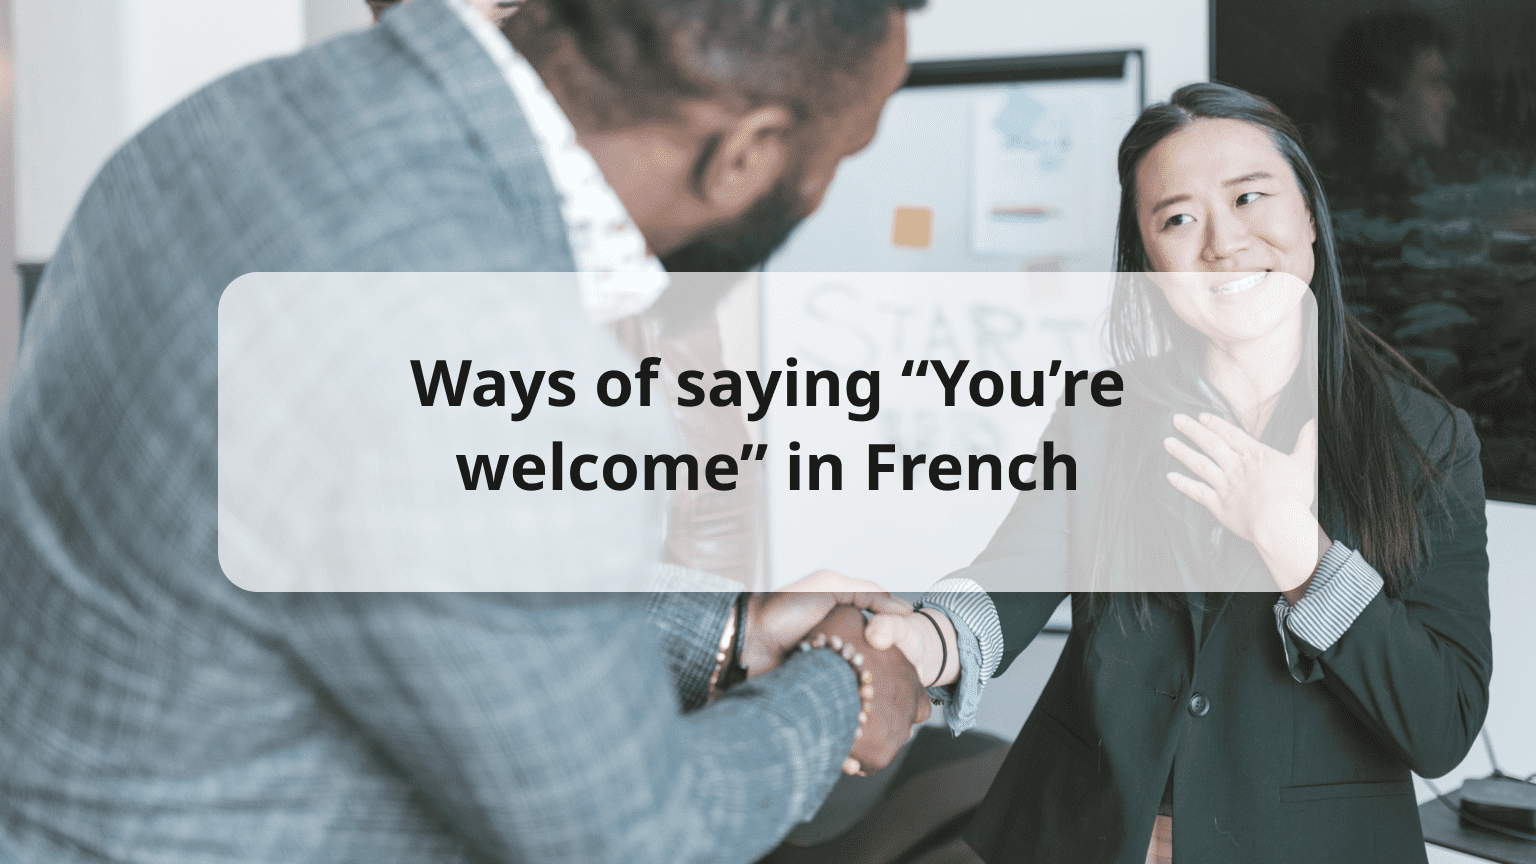 7 Ways to say “You're Welcome” in French